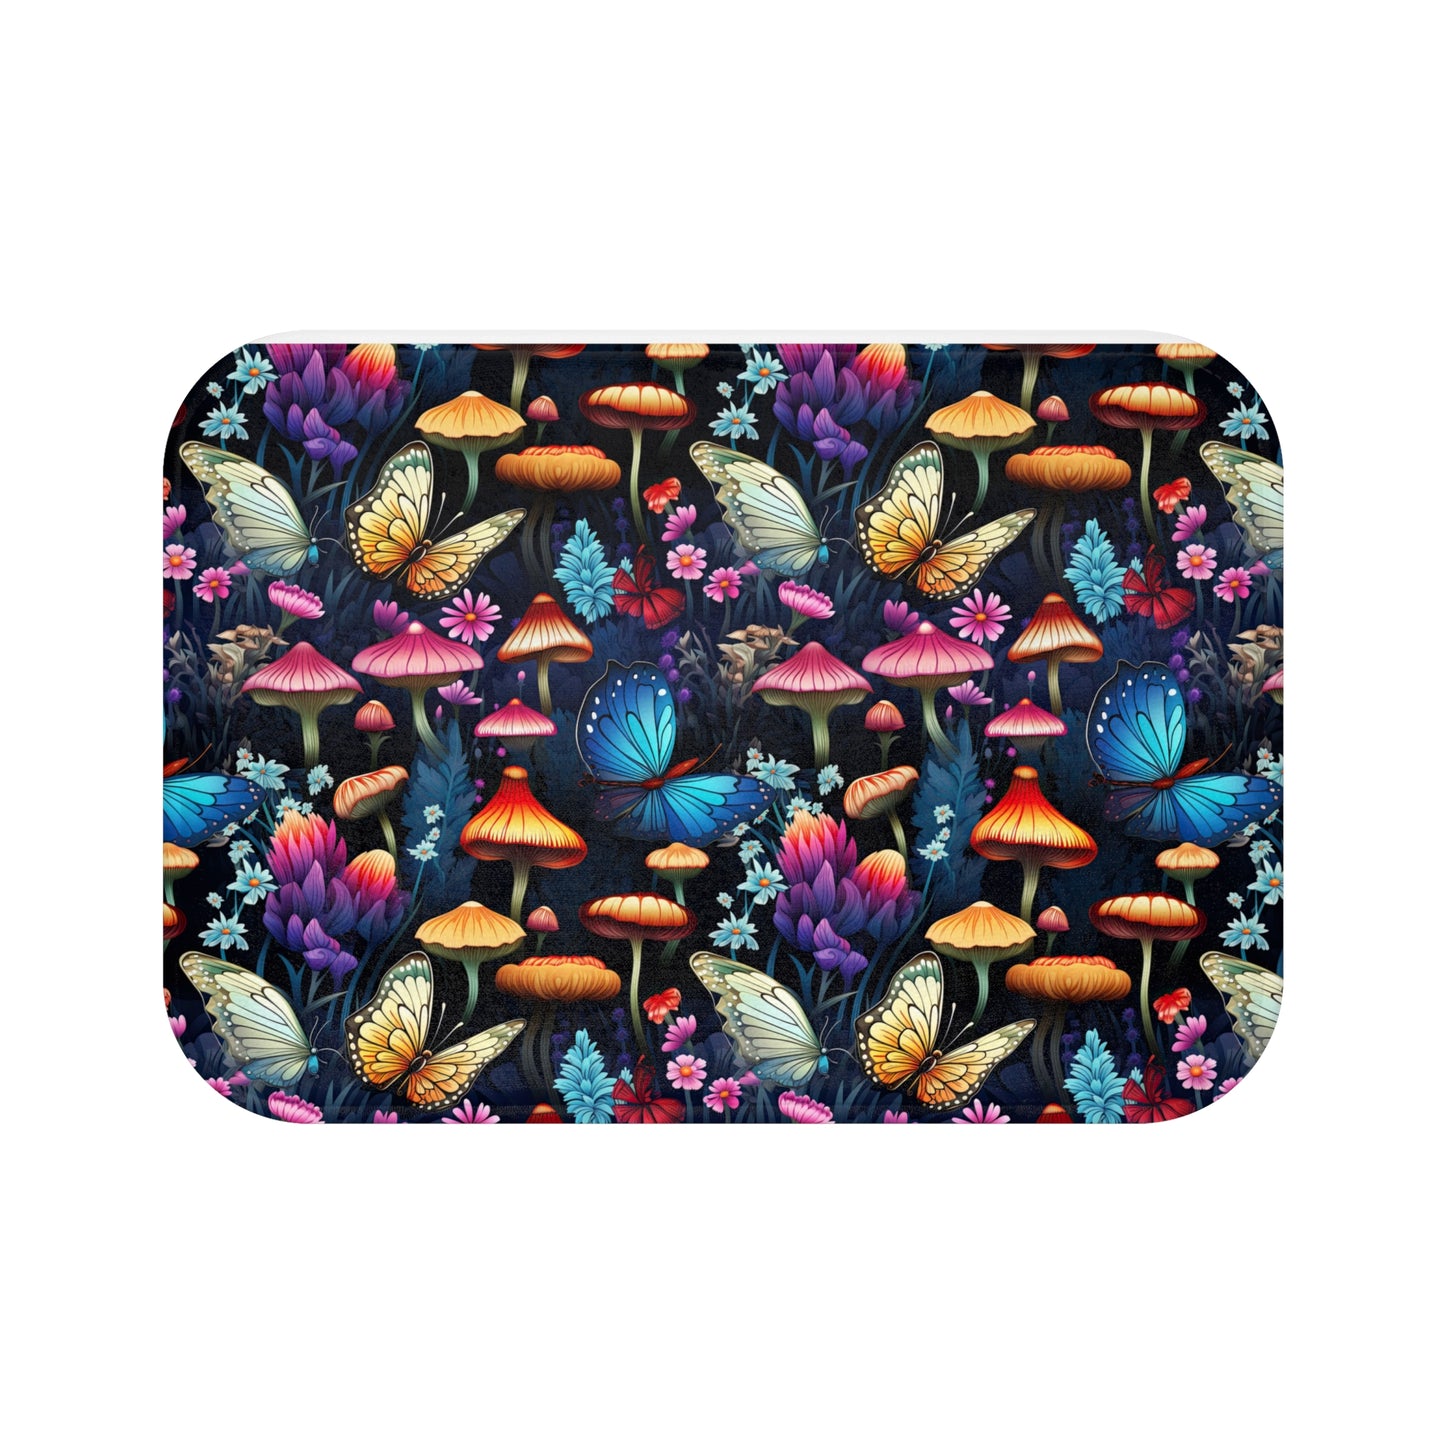 Neon Nocturne: Illuminated Butterfly and Mushroom Silhouettes Against the Night Sky - Bathroom Non-Slip Mat 2 Sizes